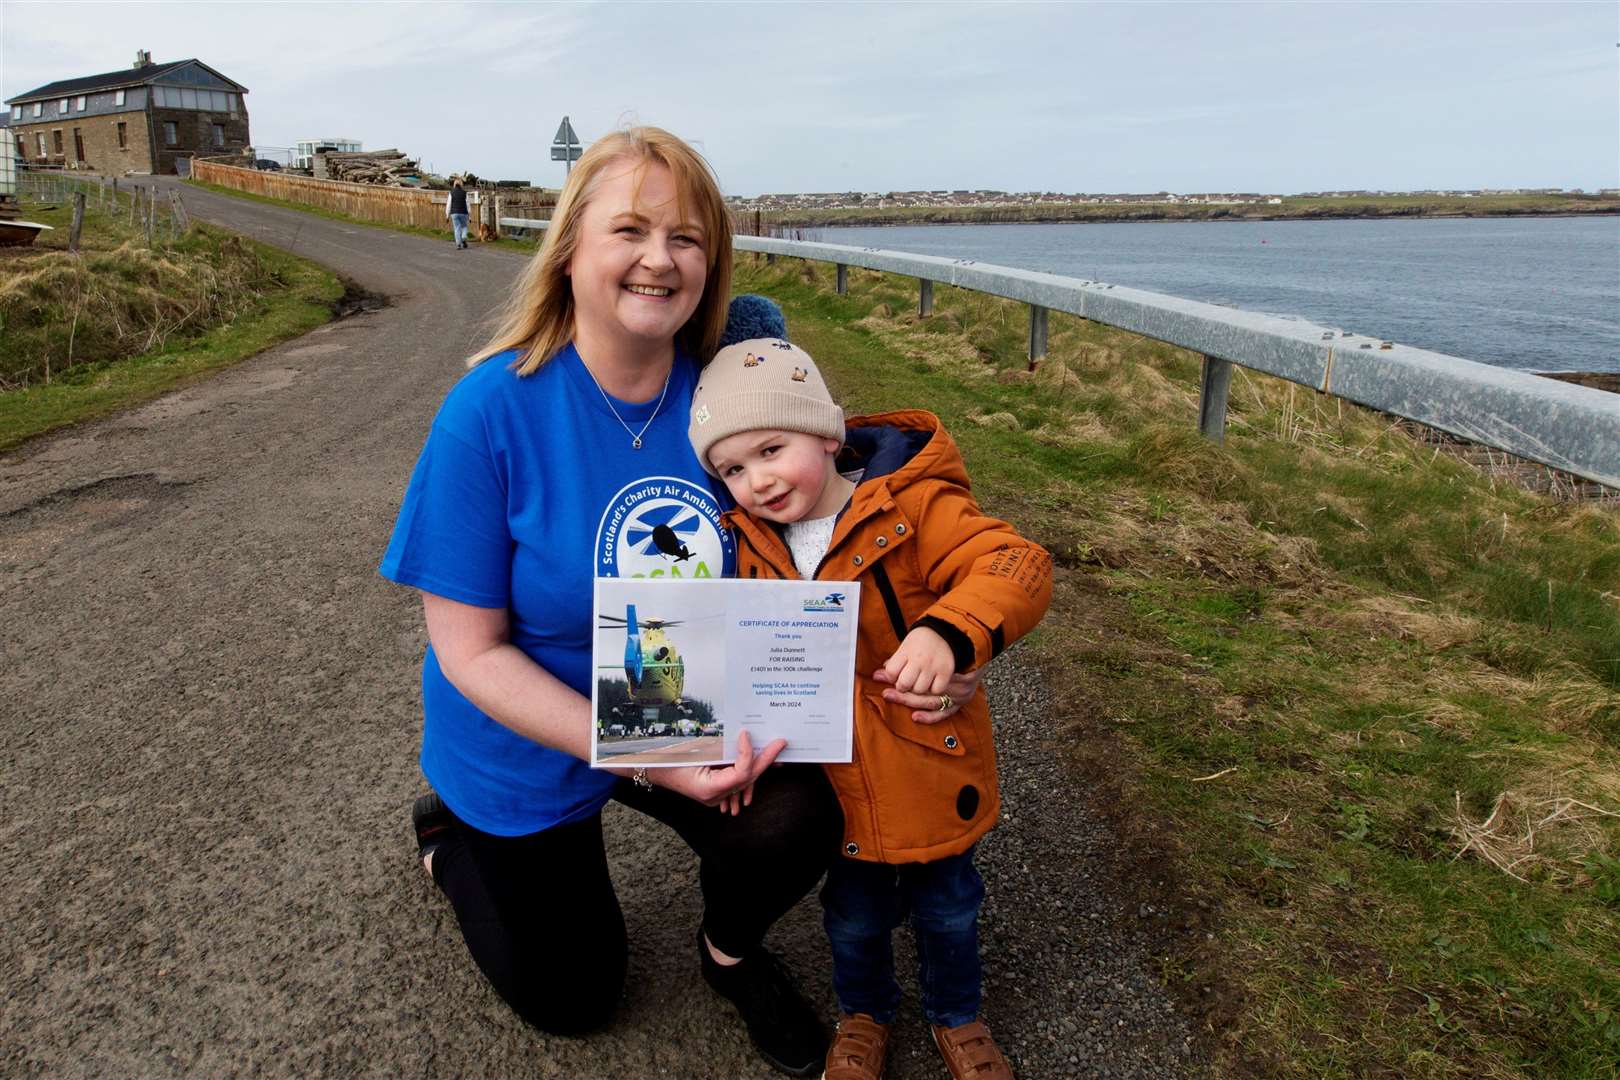 Julia Dunnett with her two-year-old grandson Danny Grant and the certificate she has received after walking 211k and raising £1401 for Scotland's Charity Air Ambulance. Picture: Robert MacDonald / Northern Studios